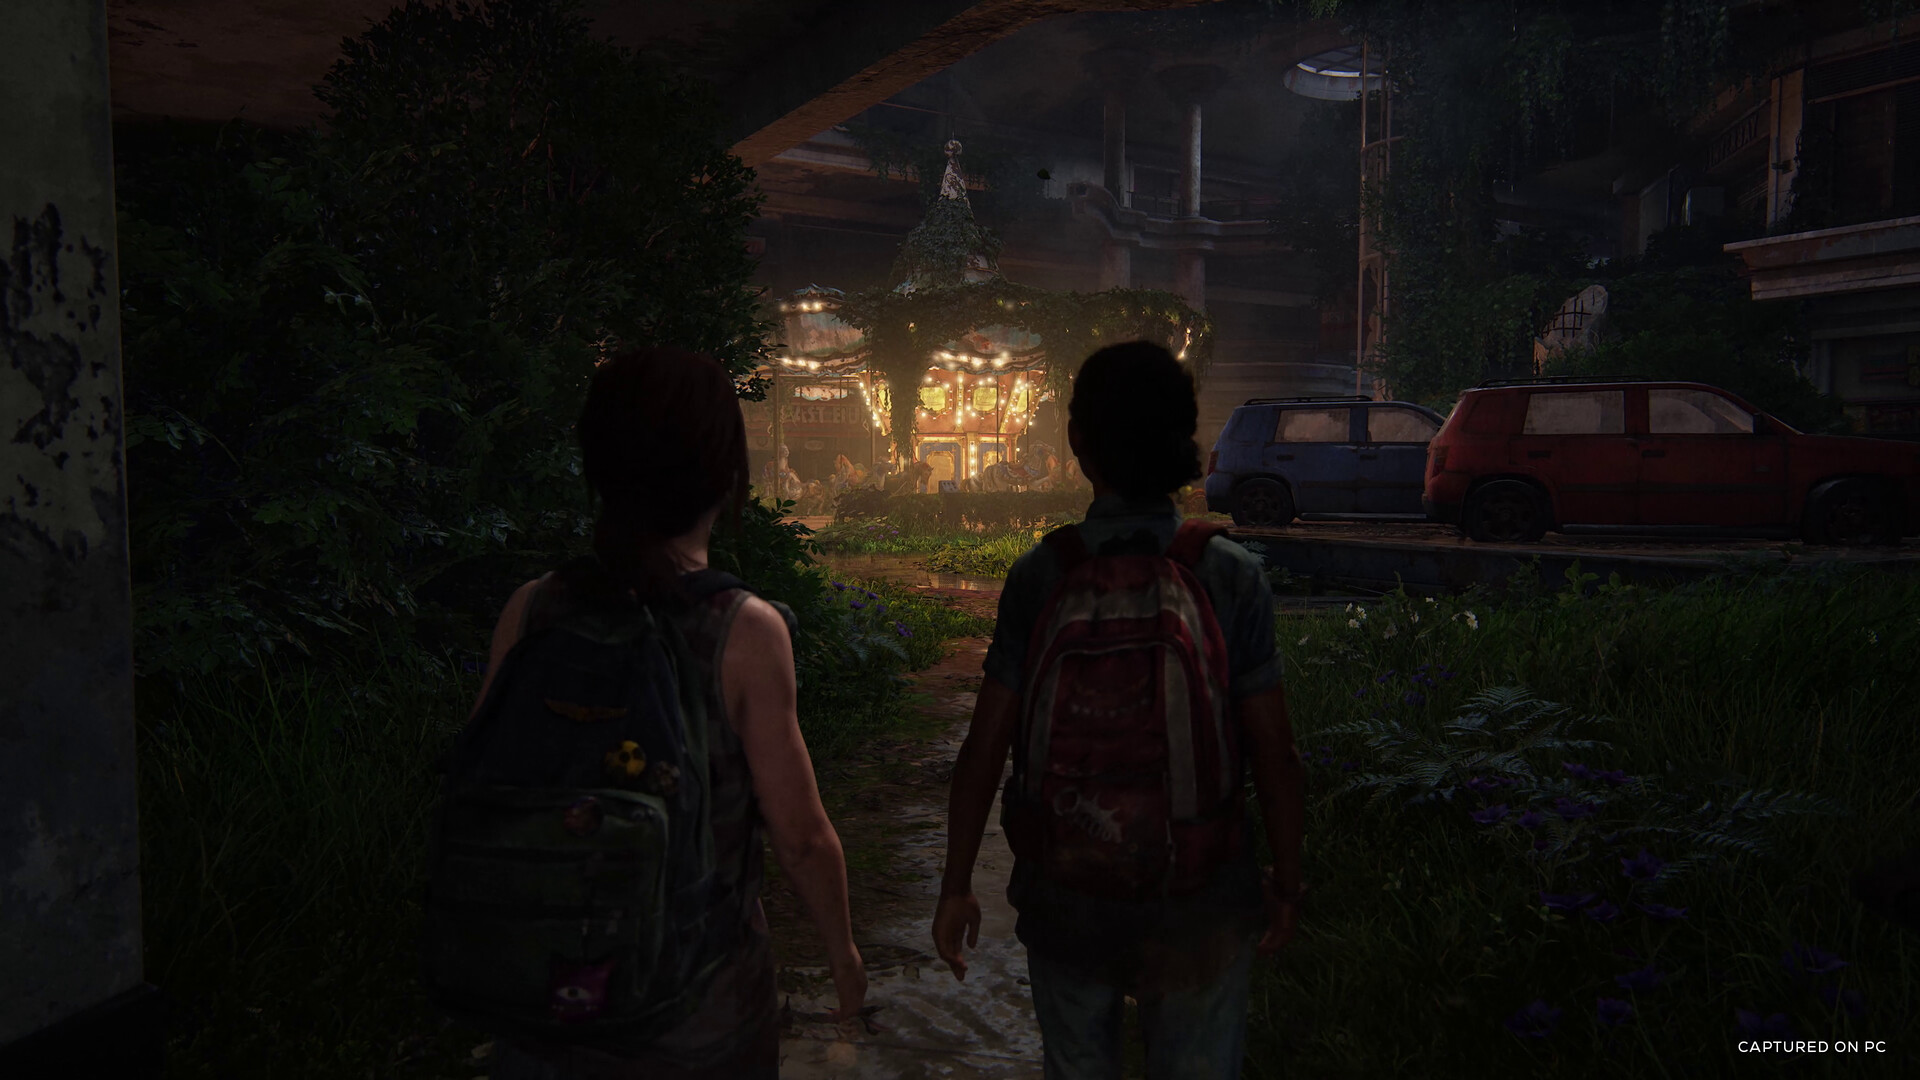 Naughty Dog on X: The Last of Us Part I Firefly Edition for PC on Steam is  also available for pre-purchase until release on 3.28.23, including a  SteelBook case, comics, and more! (